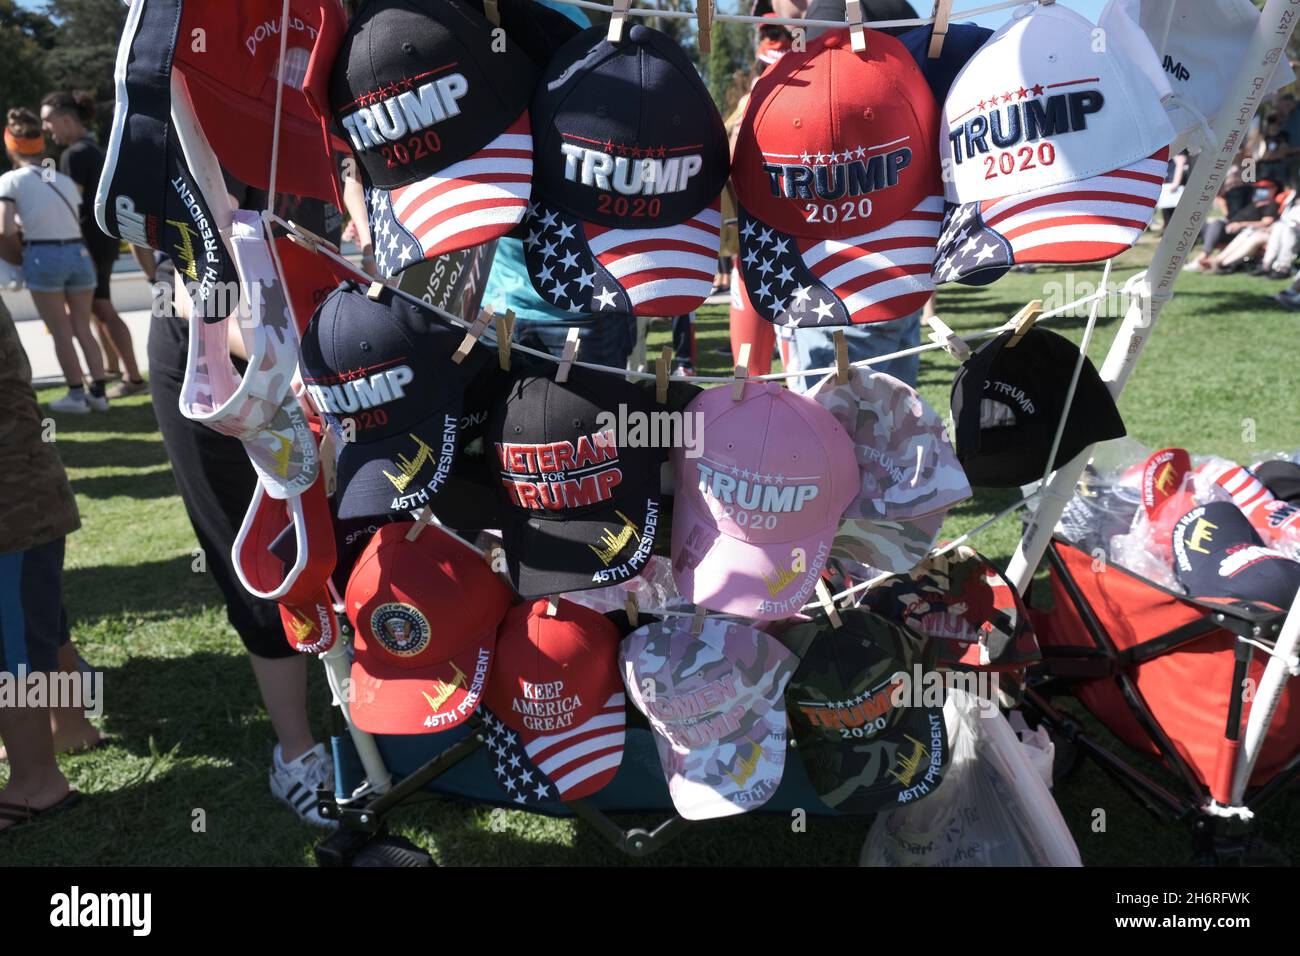 Los Angeles, CA, USA. 8th Aug, 2020. Multiple pro-Trump hats are on display for sale at a weekly rally in Los Angeles. Credit: Rise Images/Alamy Stock Photo